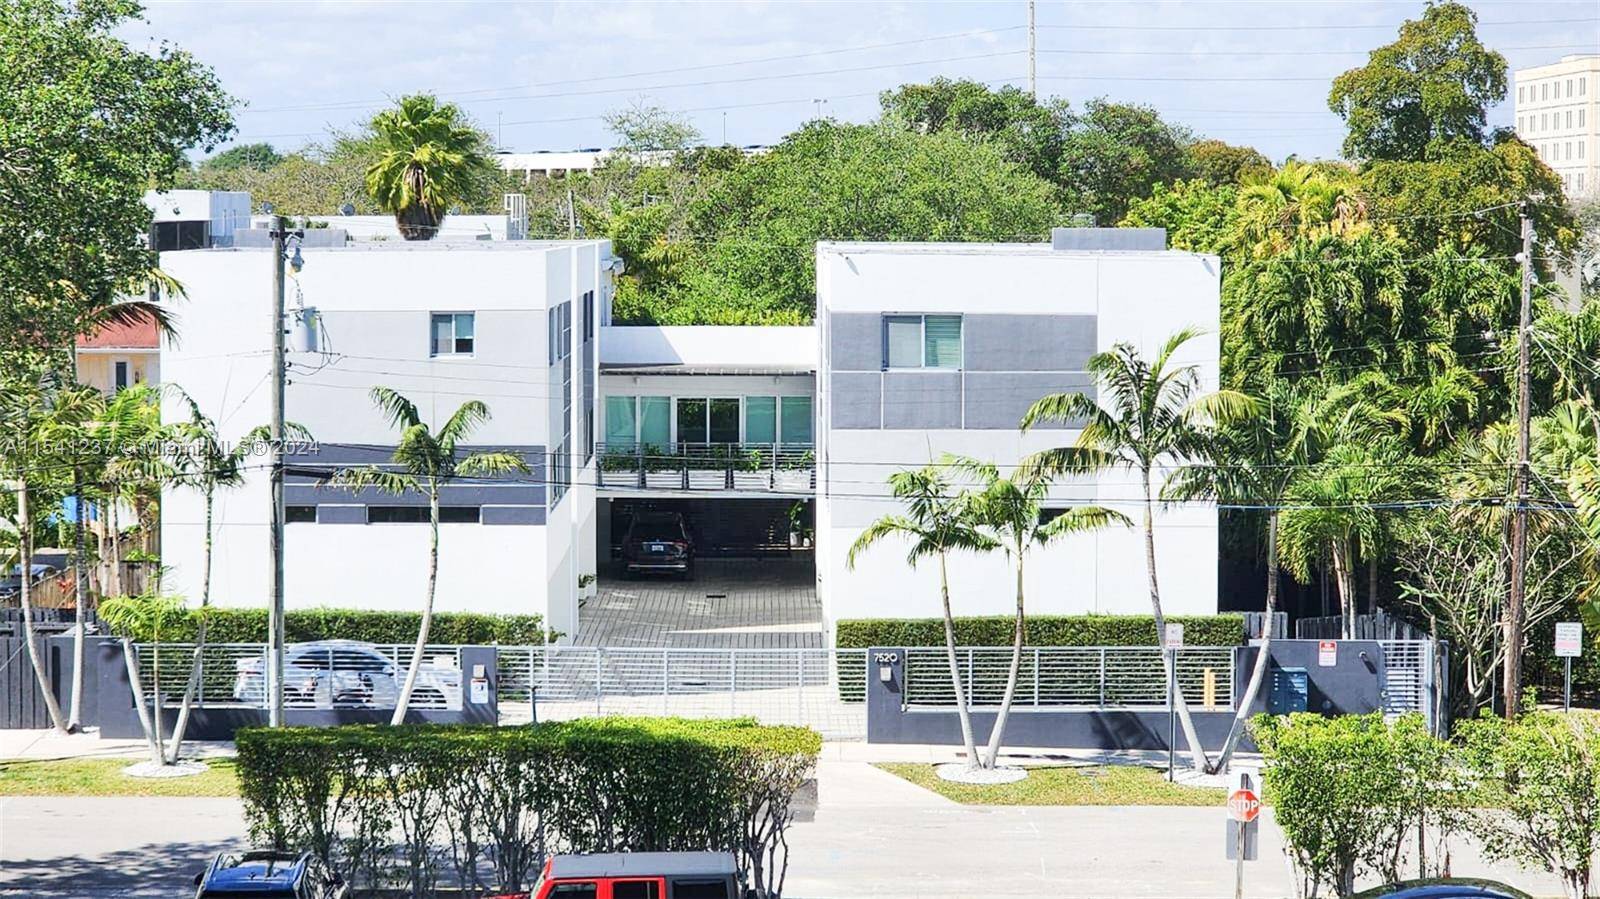 This fantastic contemporary South Miami townhouse boasts an open floor plan spread across three levels.